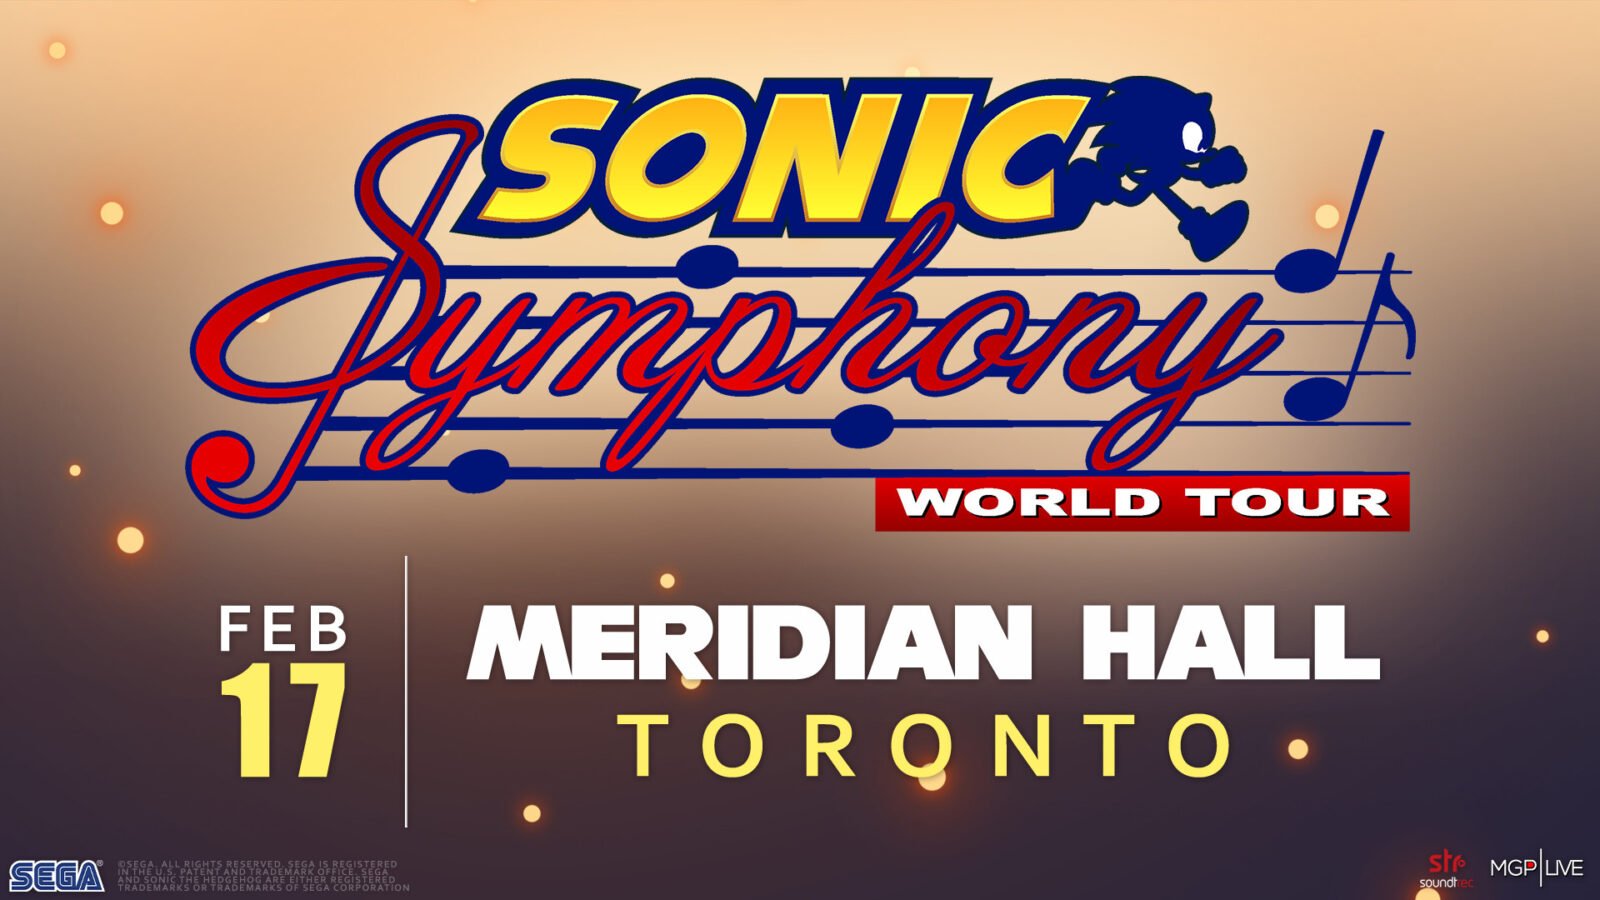 Sonic Symphony World Tour Hits Toronto In February Tickets On Sale Now!